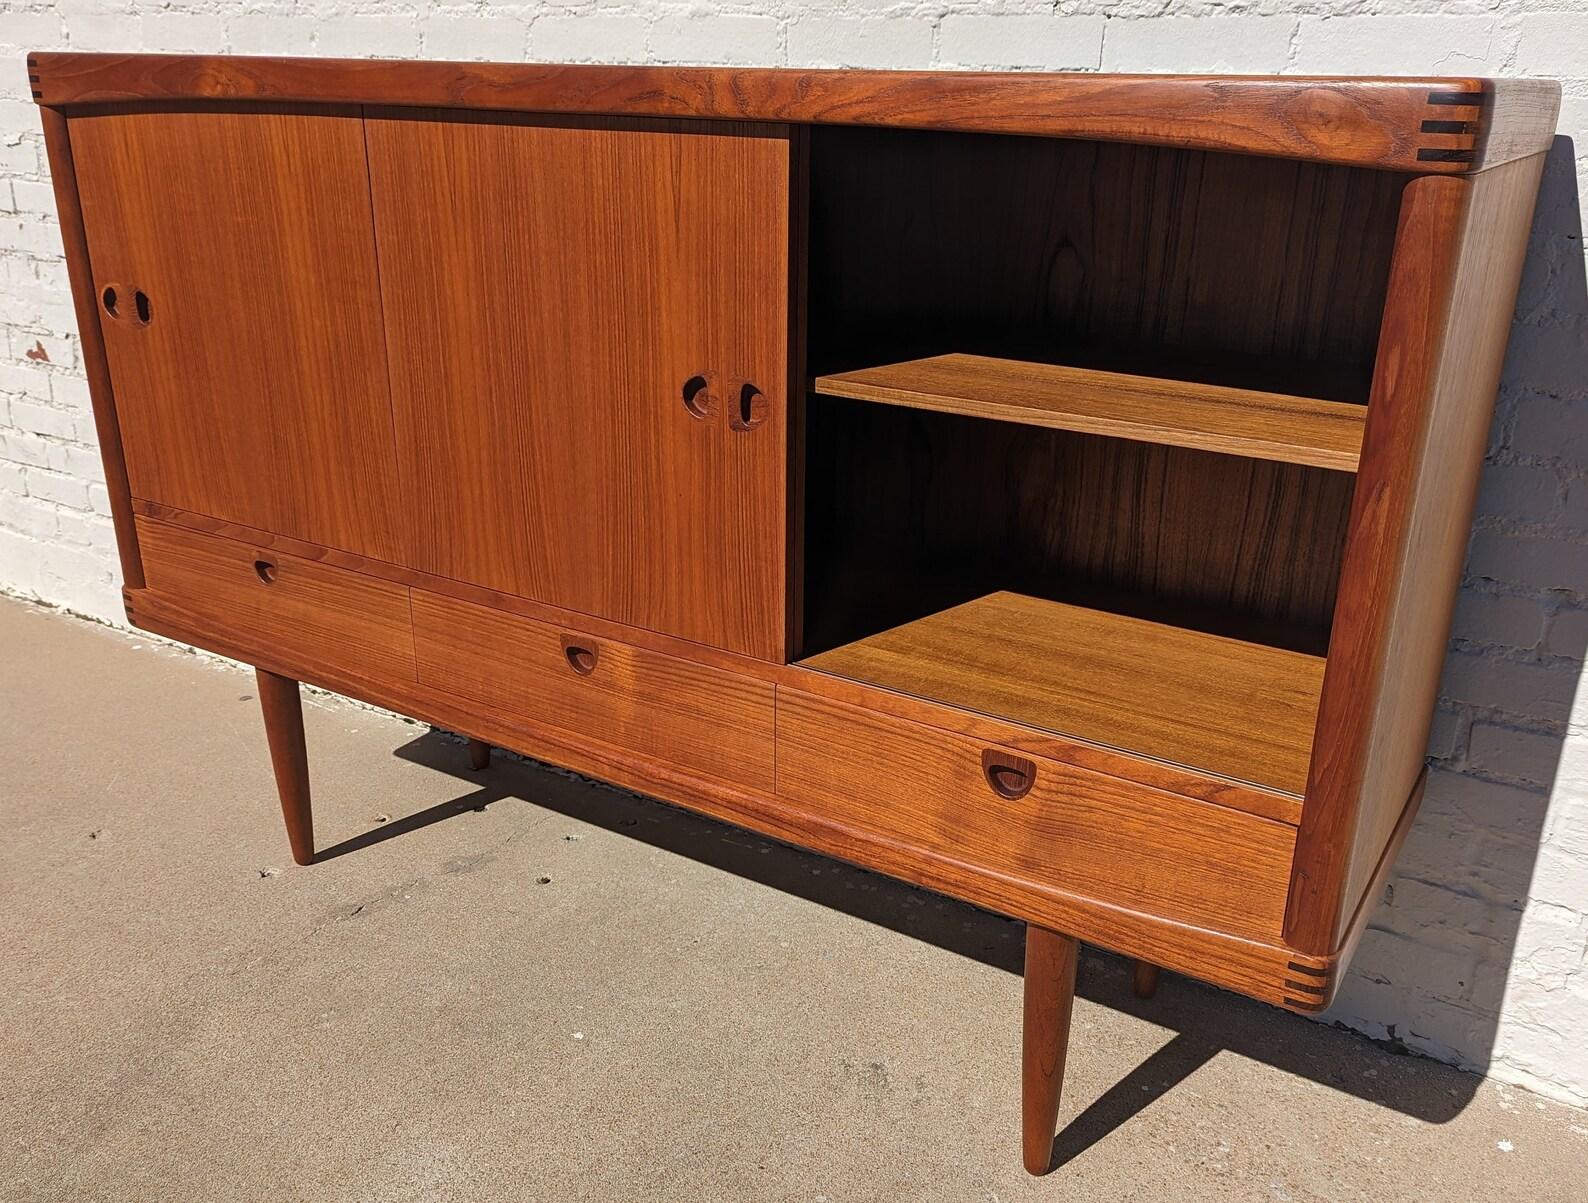 Mid Century Modern Danish Modern Teak Cocktail Cabinet by Bramin

Above average vintage condition and structurally sound. Stunning piece and very well constructed. Has some expected slight finish wear and scratching. Has a couple small dings on